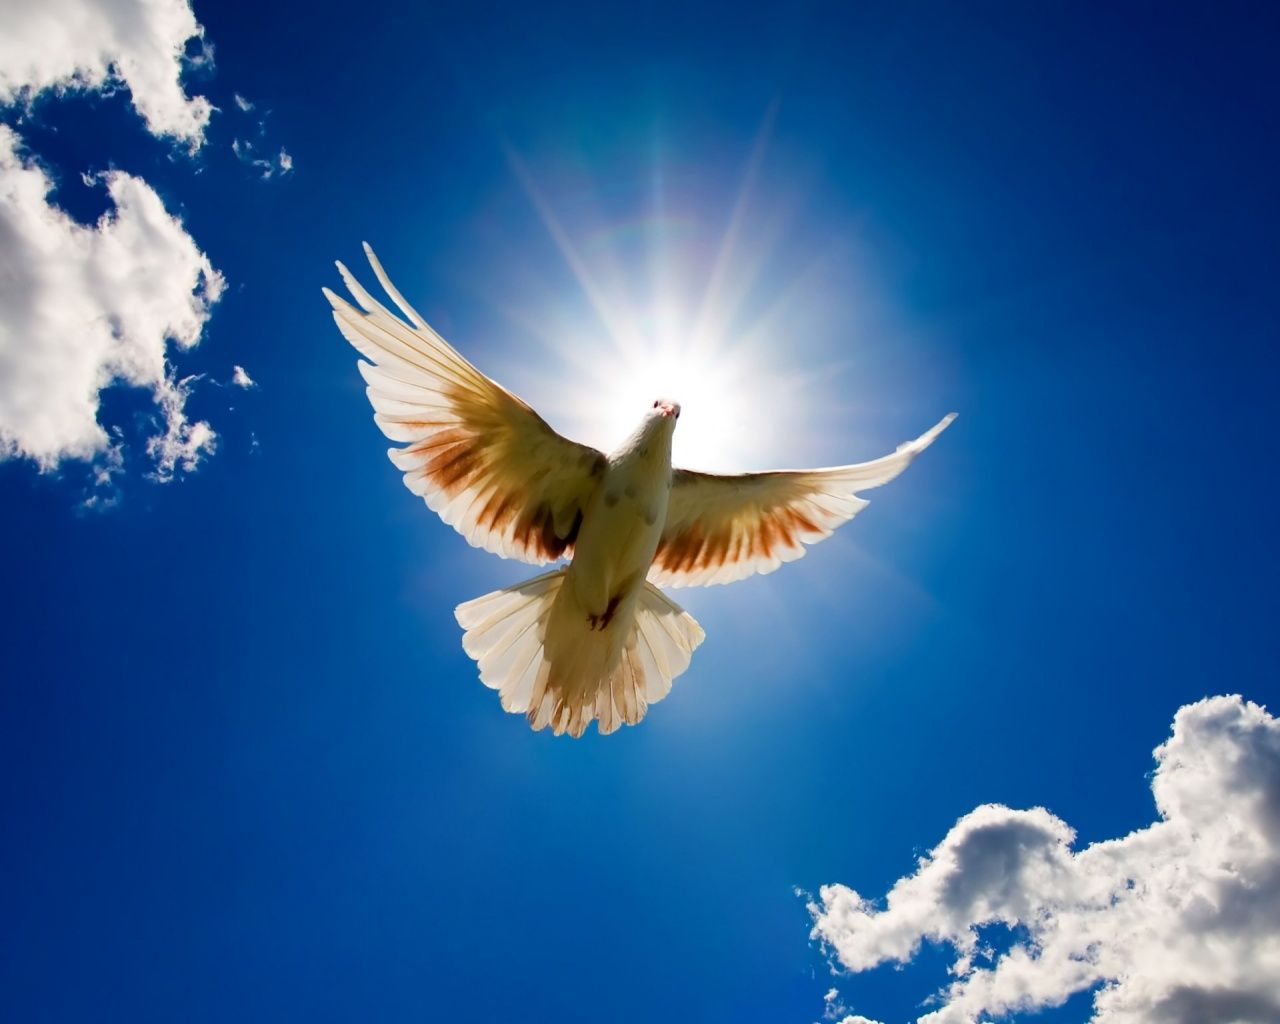 World Peace Wallpapers 1280x1024